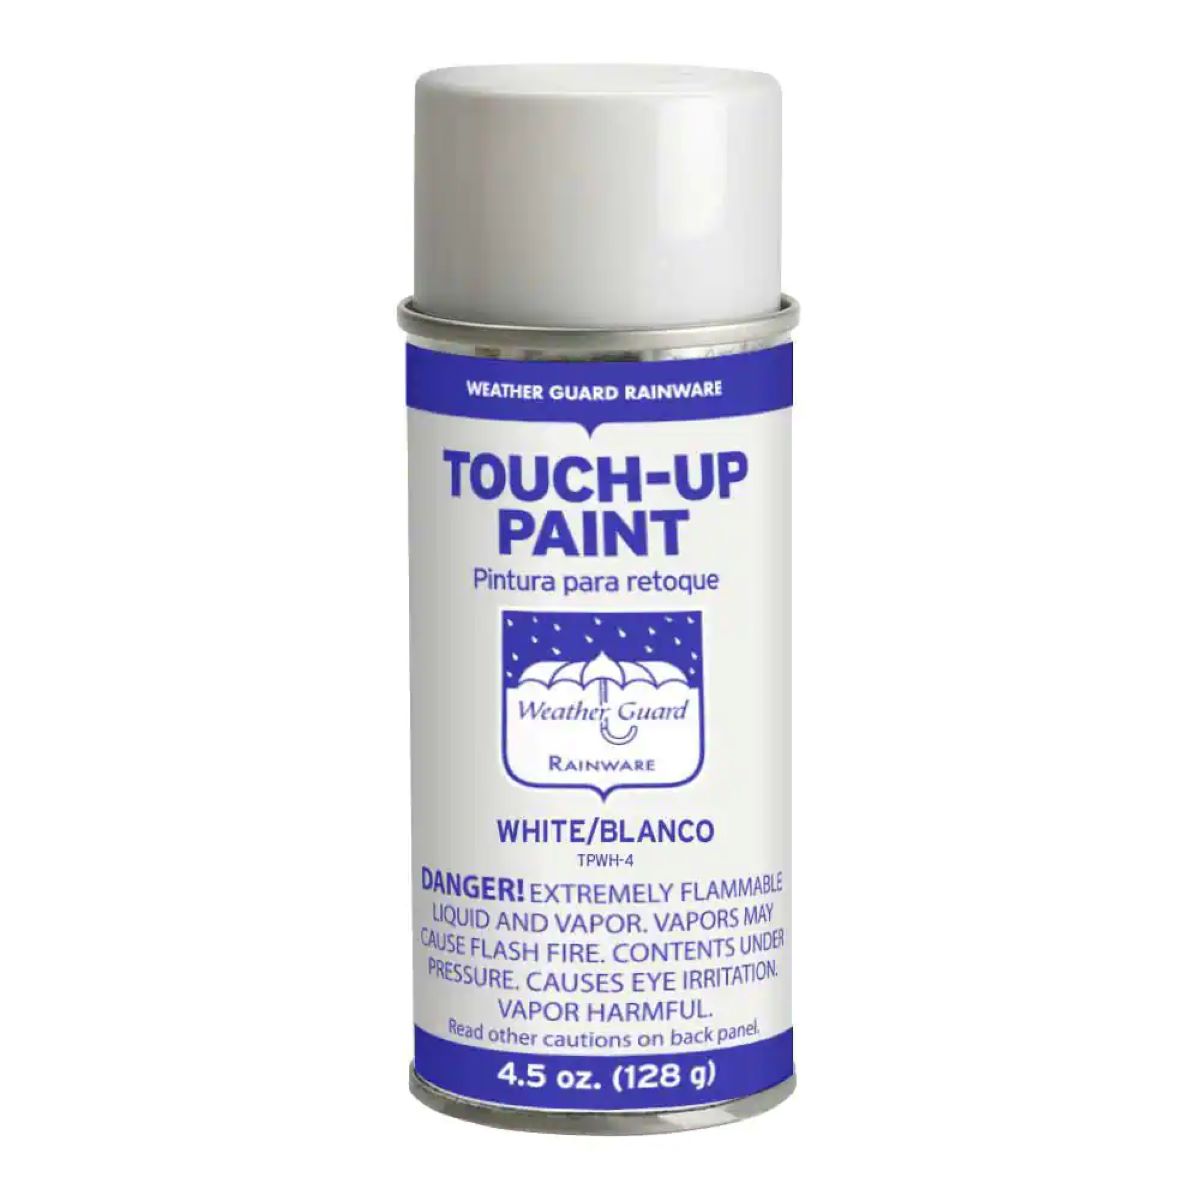 How To Store Touch Up Paint